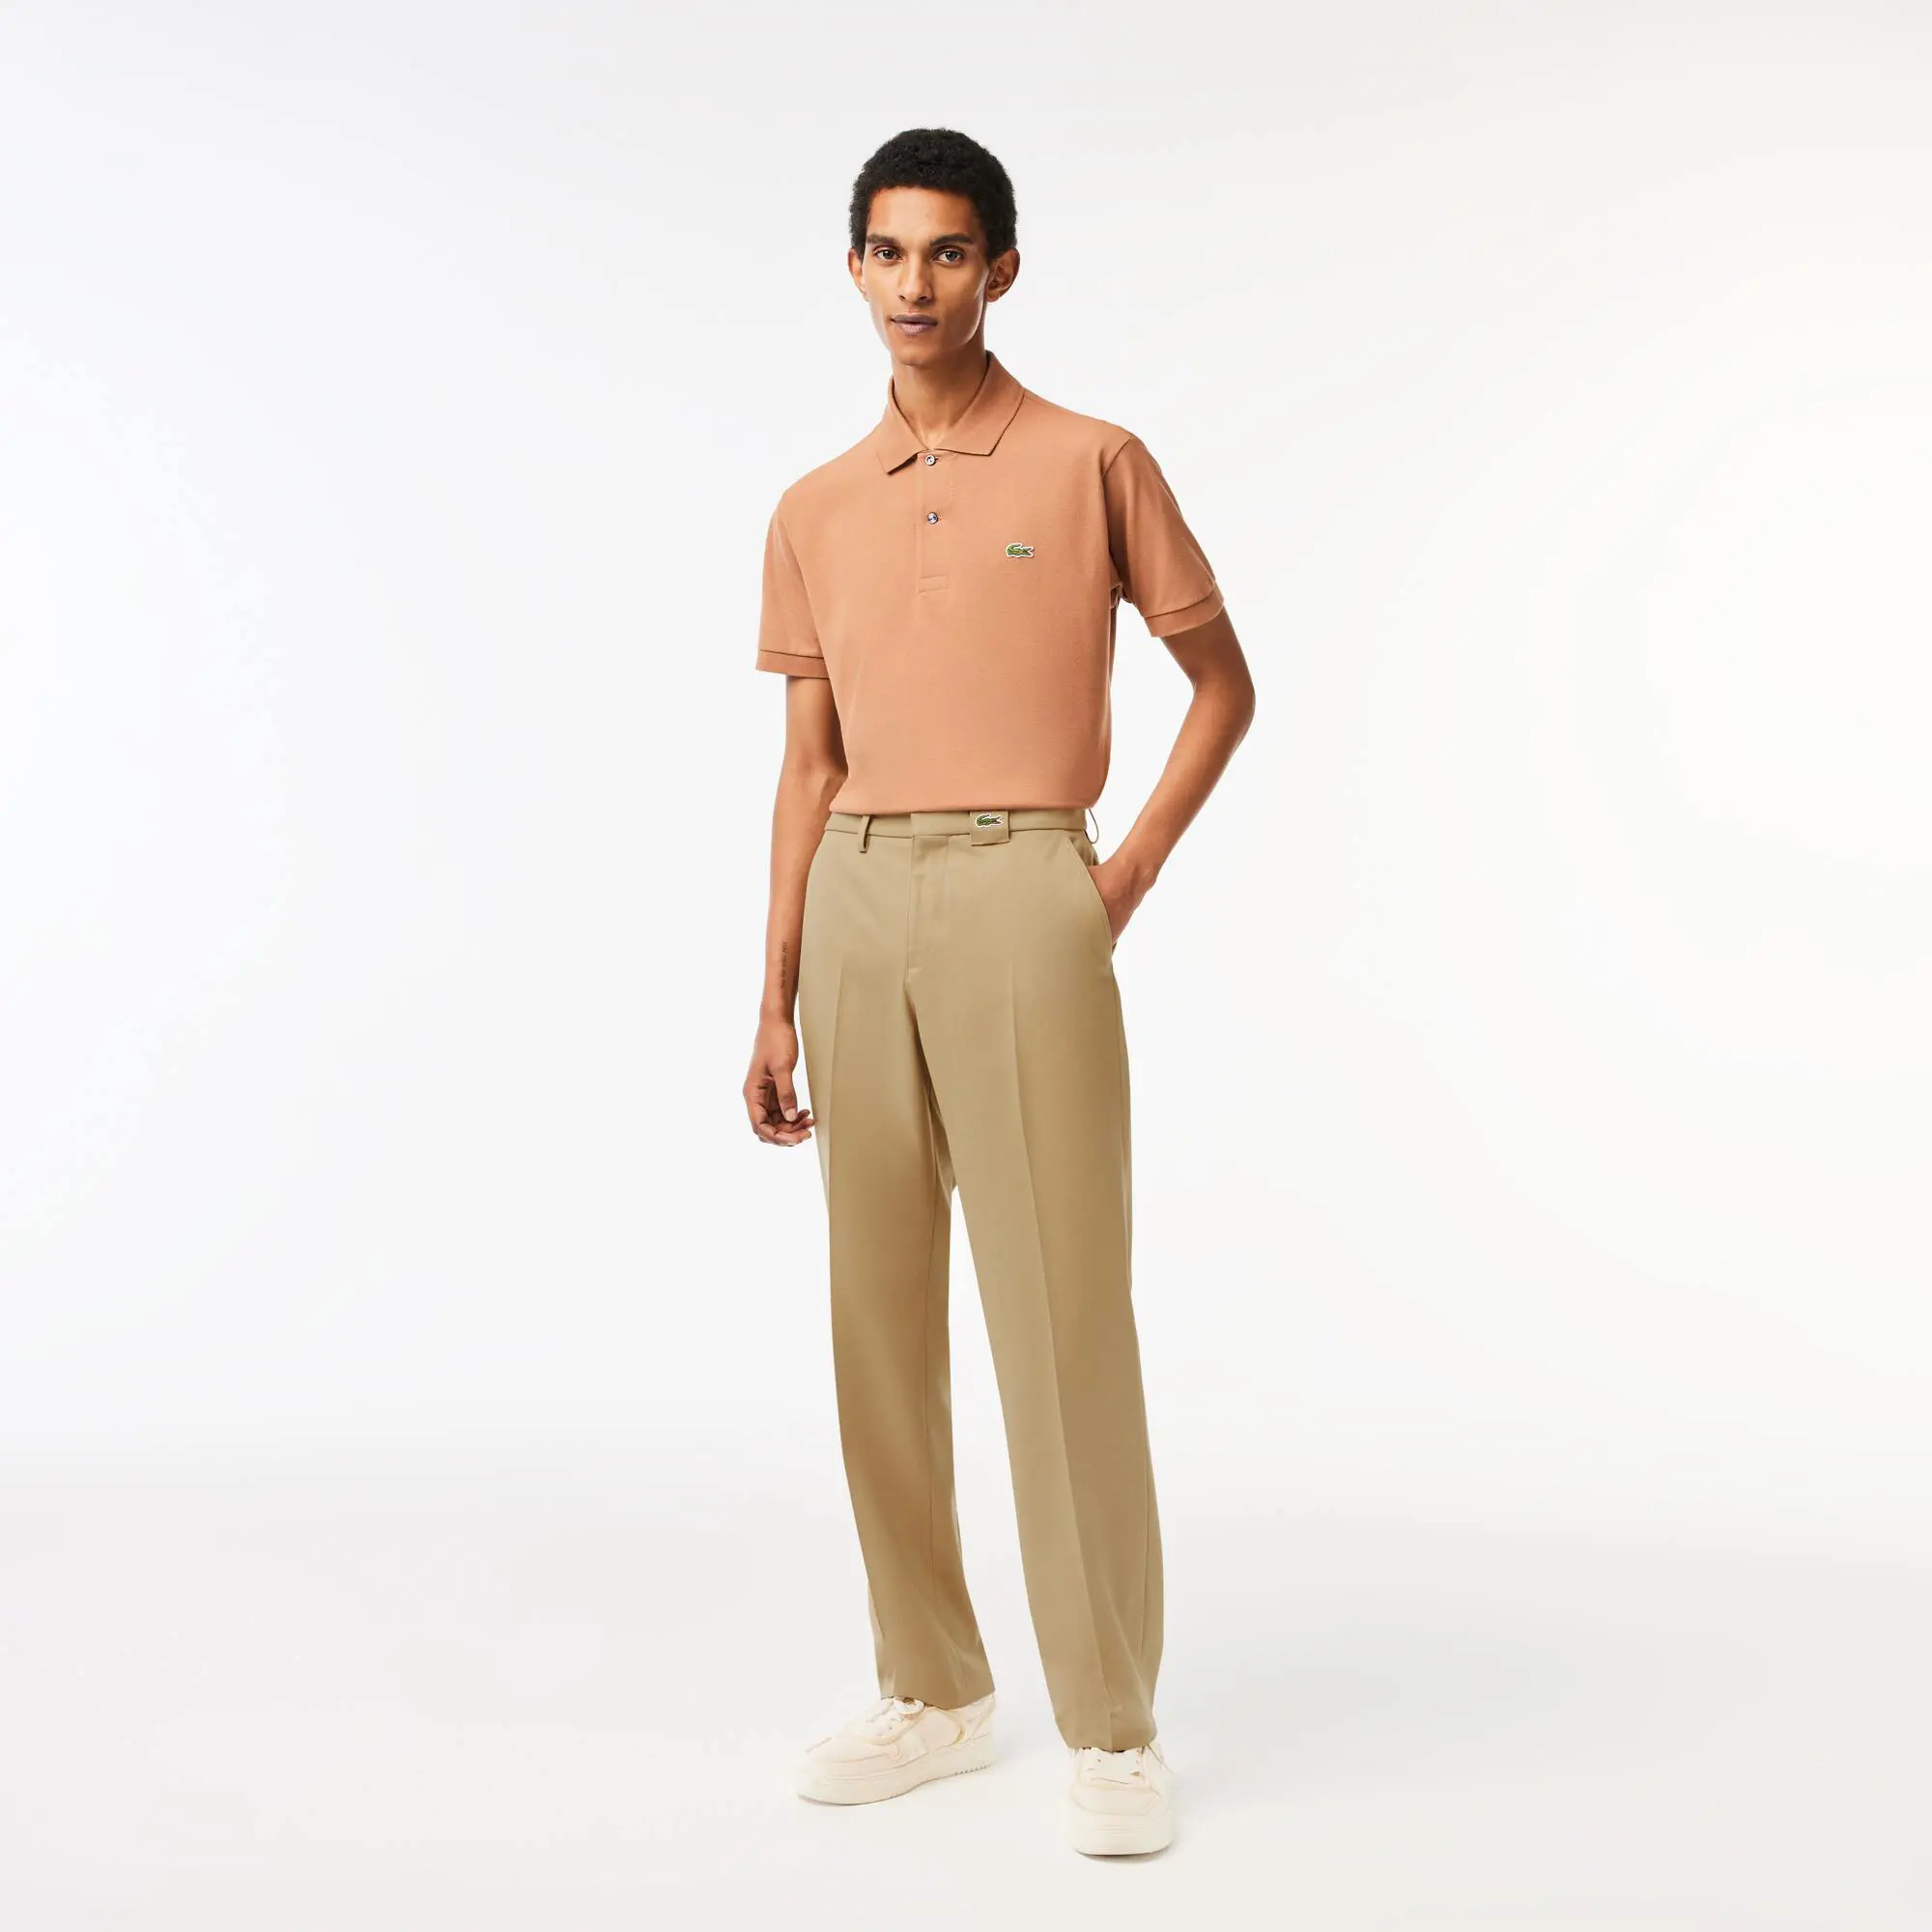 Lacoste Men’s Lacoste Chinos. 1